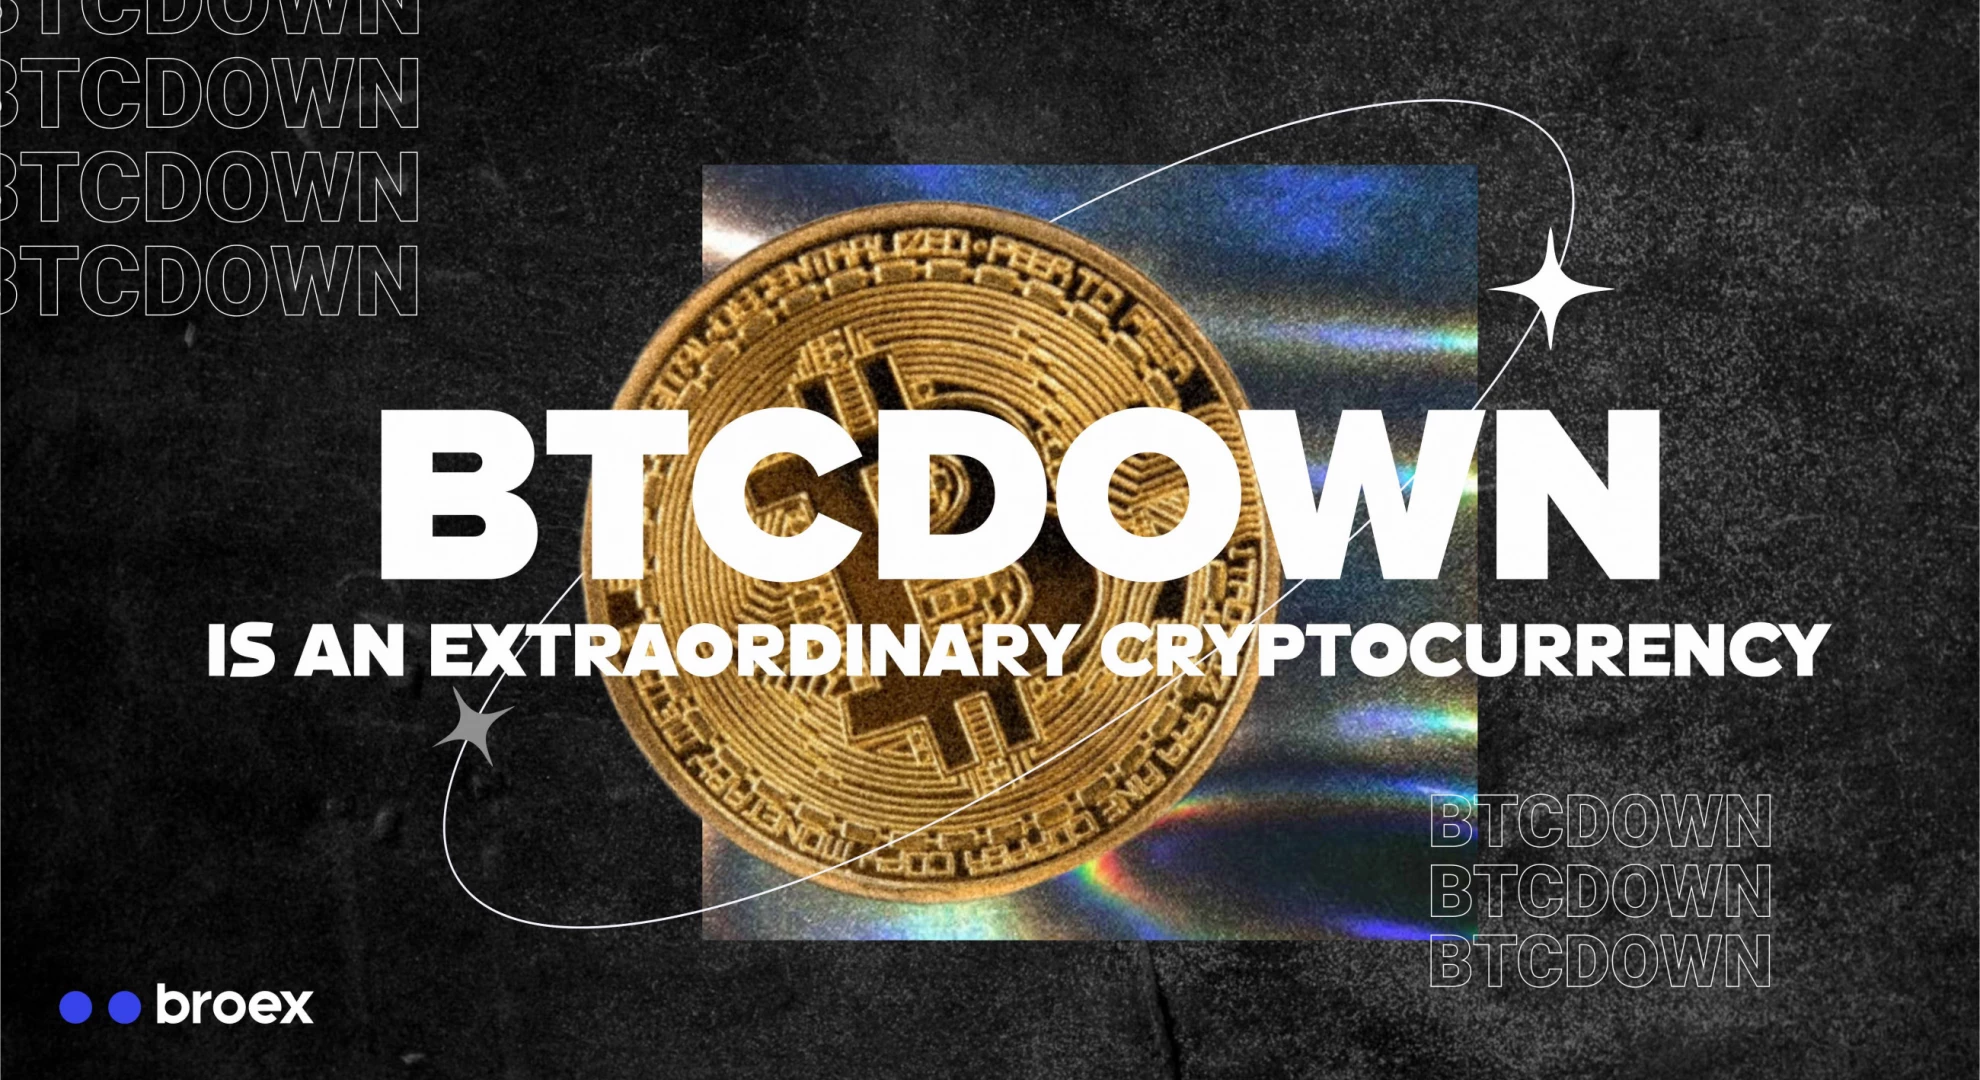 BTCDOWN cryptocurrency